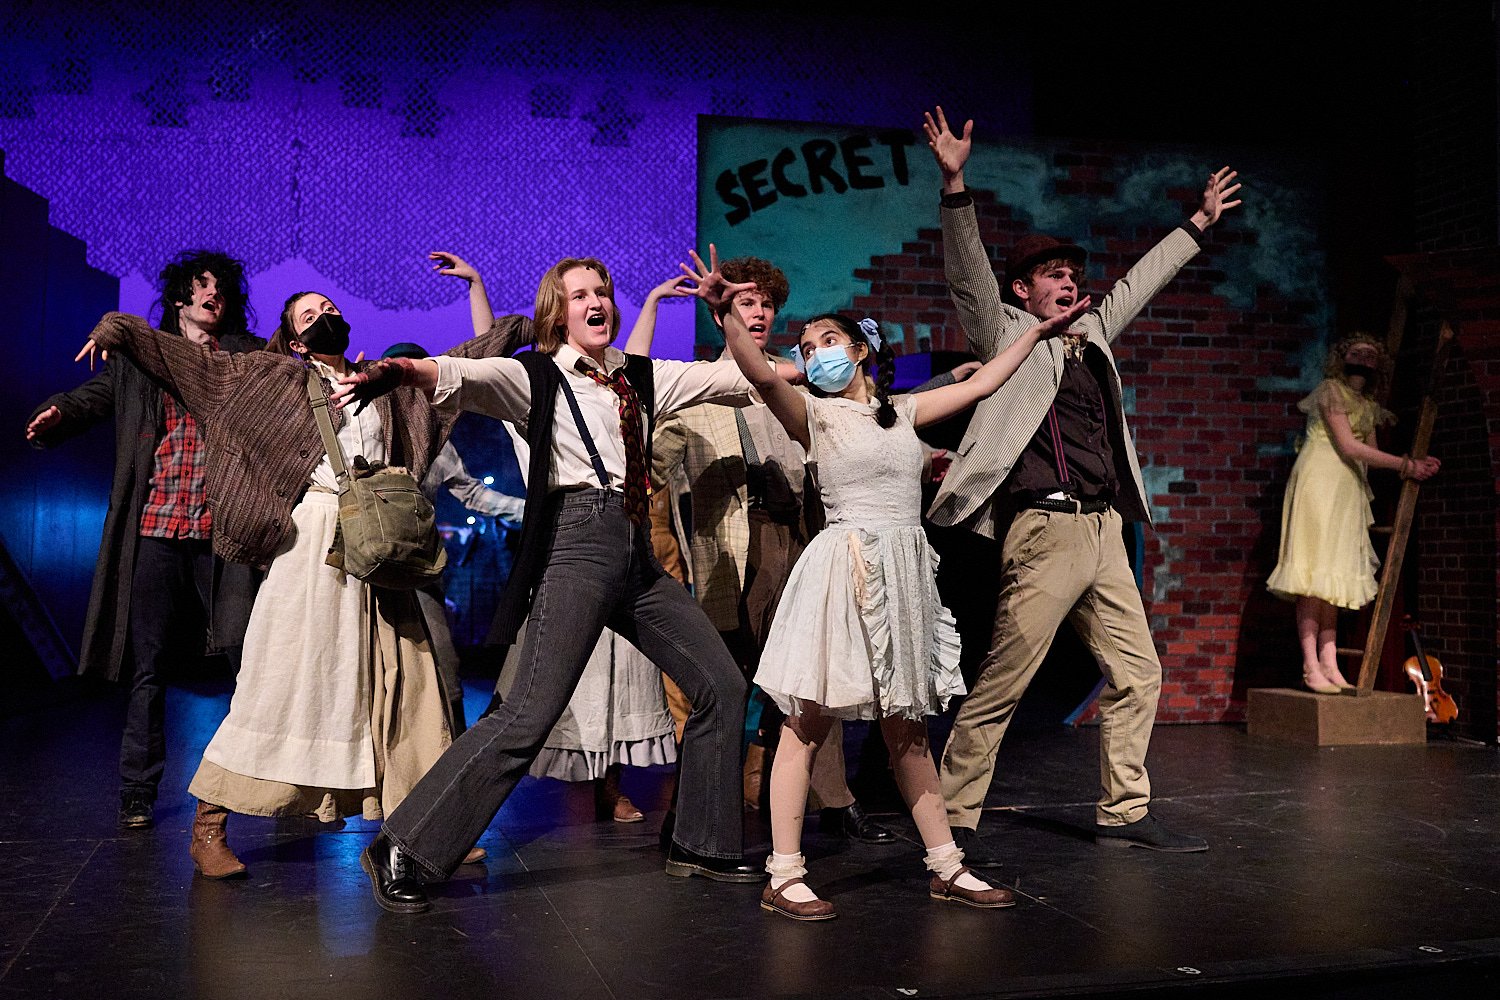  SEWICKLEY, PA, USA - MARCH 2ND 2022: High School students of Sewickley Academy are performing in an annual musical show “Urinetown” running on March 3rd-5th 2022. Shivali Saxena 